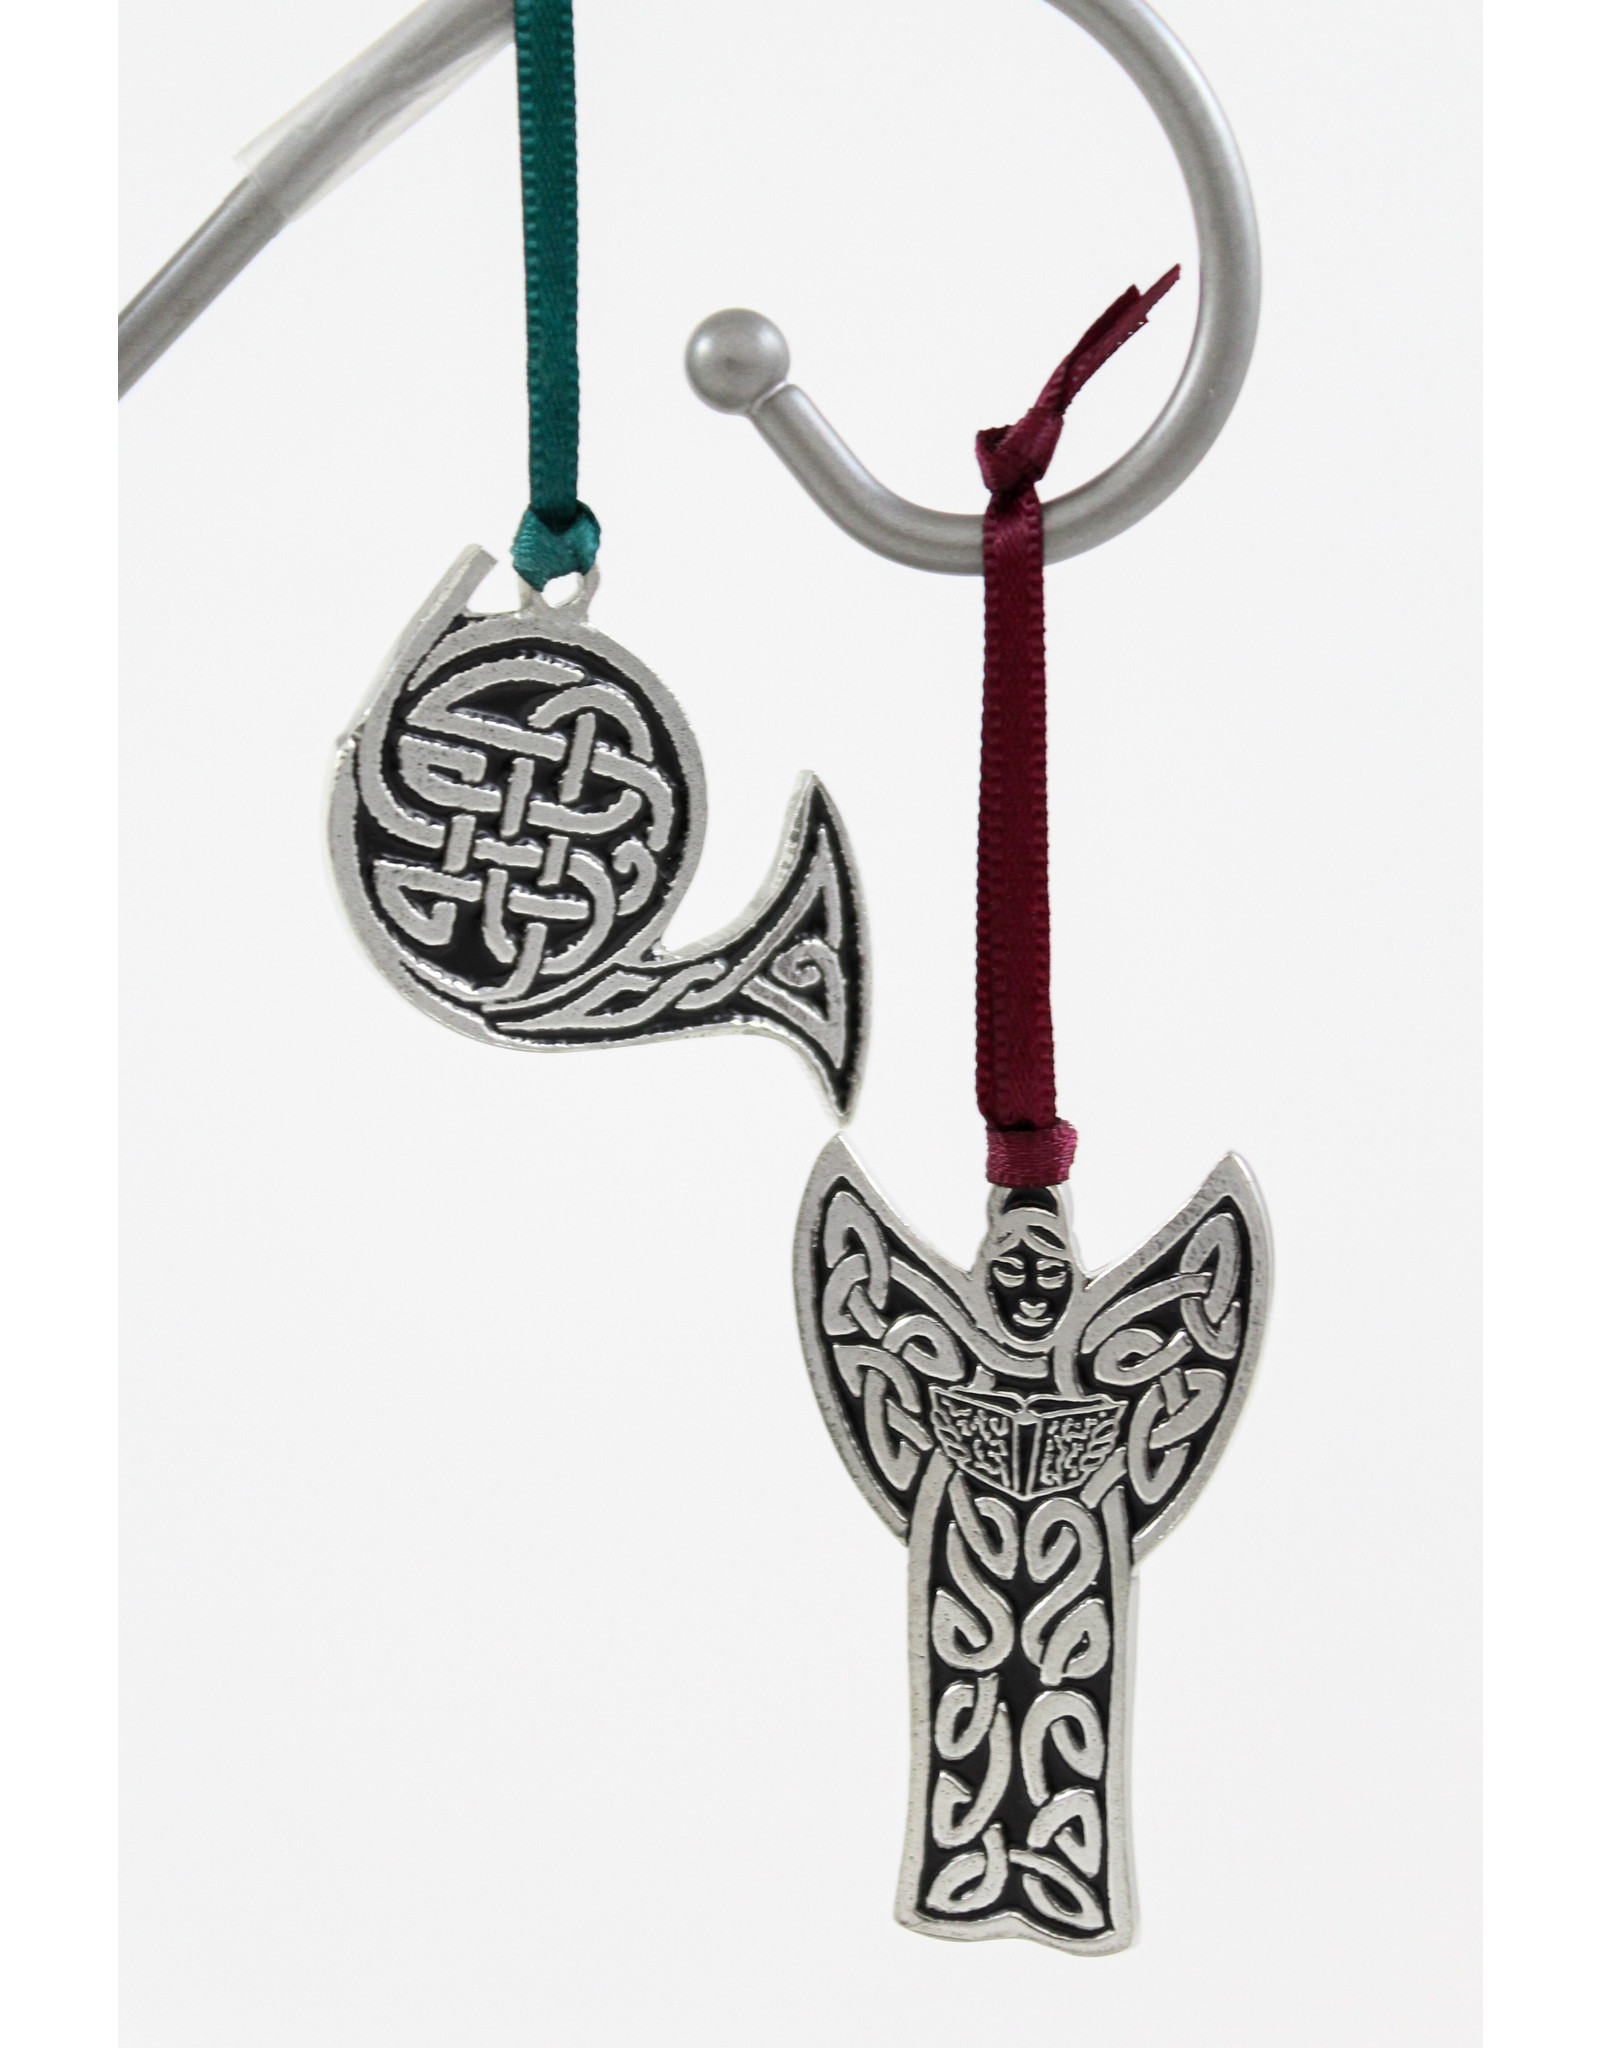 Piper Pewter Christmas Ornaments by Piper Pewter